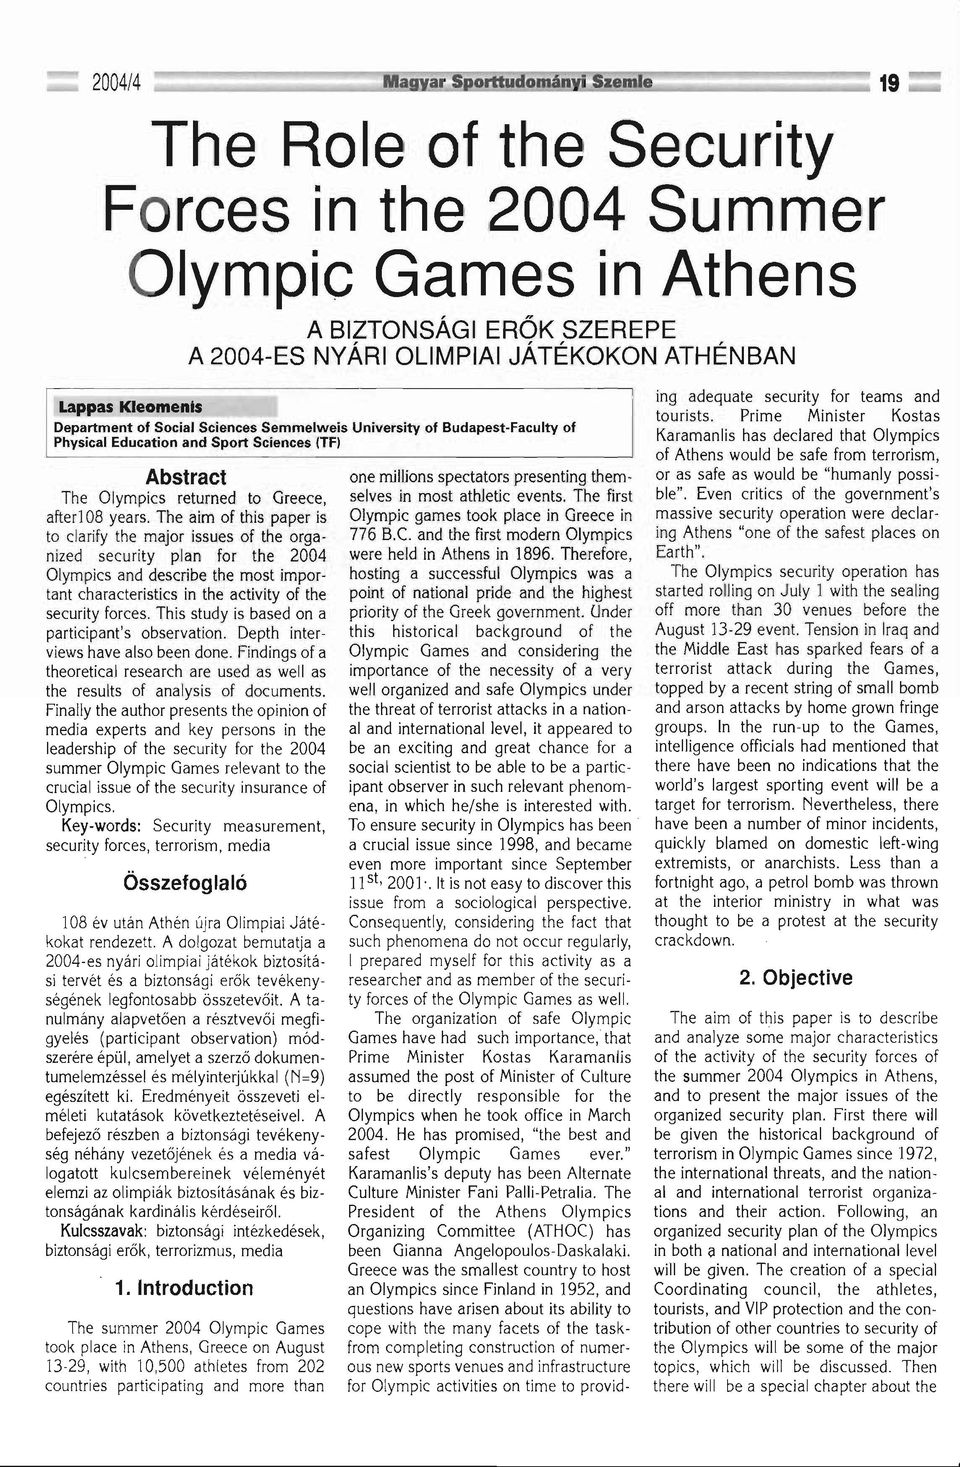 The aim of this paper is to c1arify the major issues of the organized security plan for the 2004 Olympics and describe the most important characteristics in the activity of the security forces.